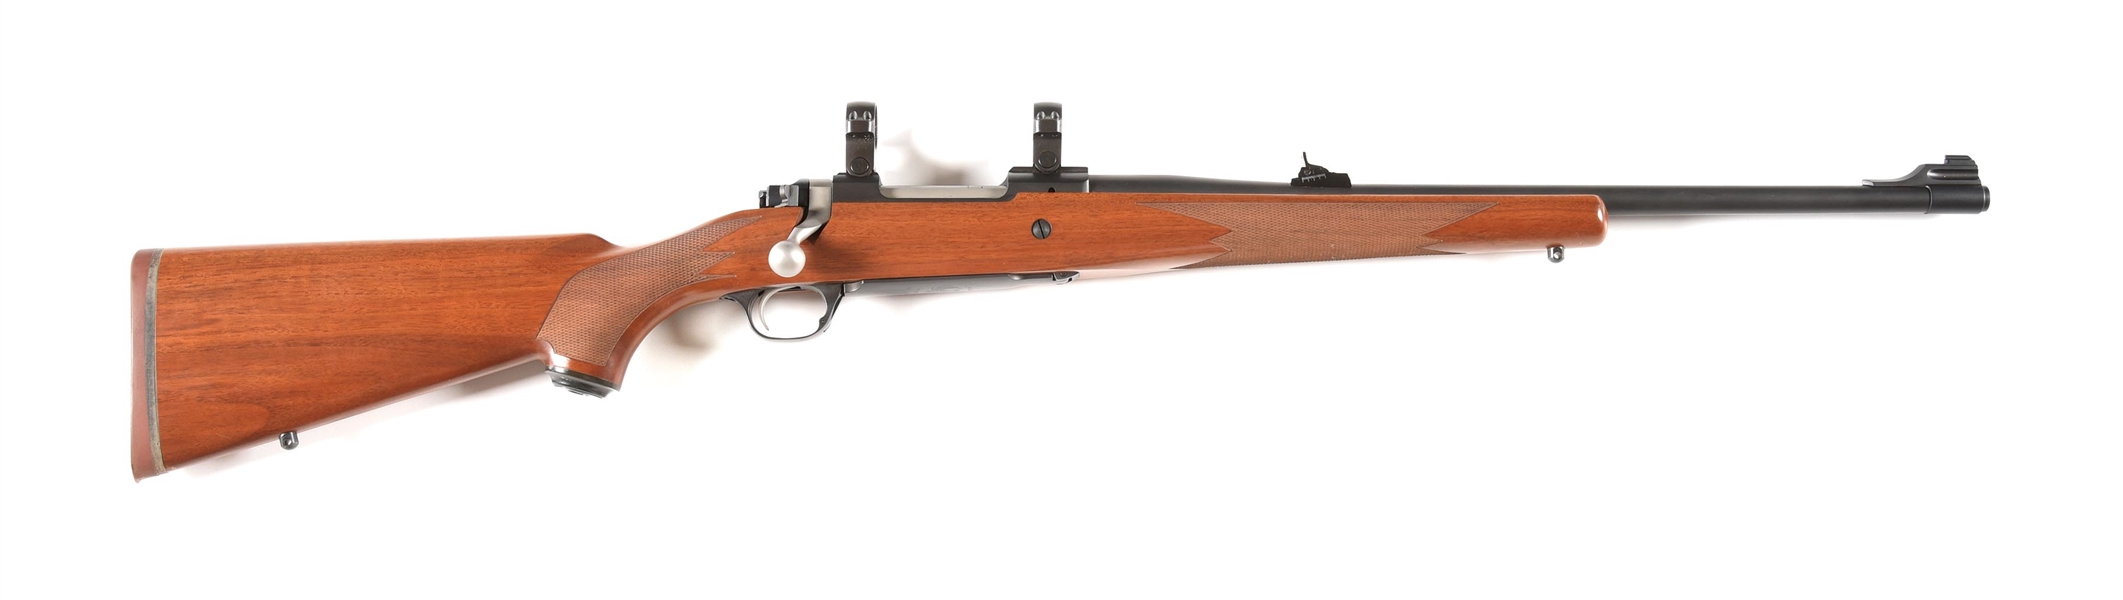 (M) RUGER MODEL 77 HAWKEYE COMPACT MAGNUM BOLT ACTION RIFLE.